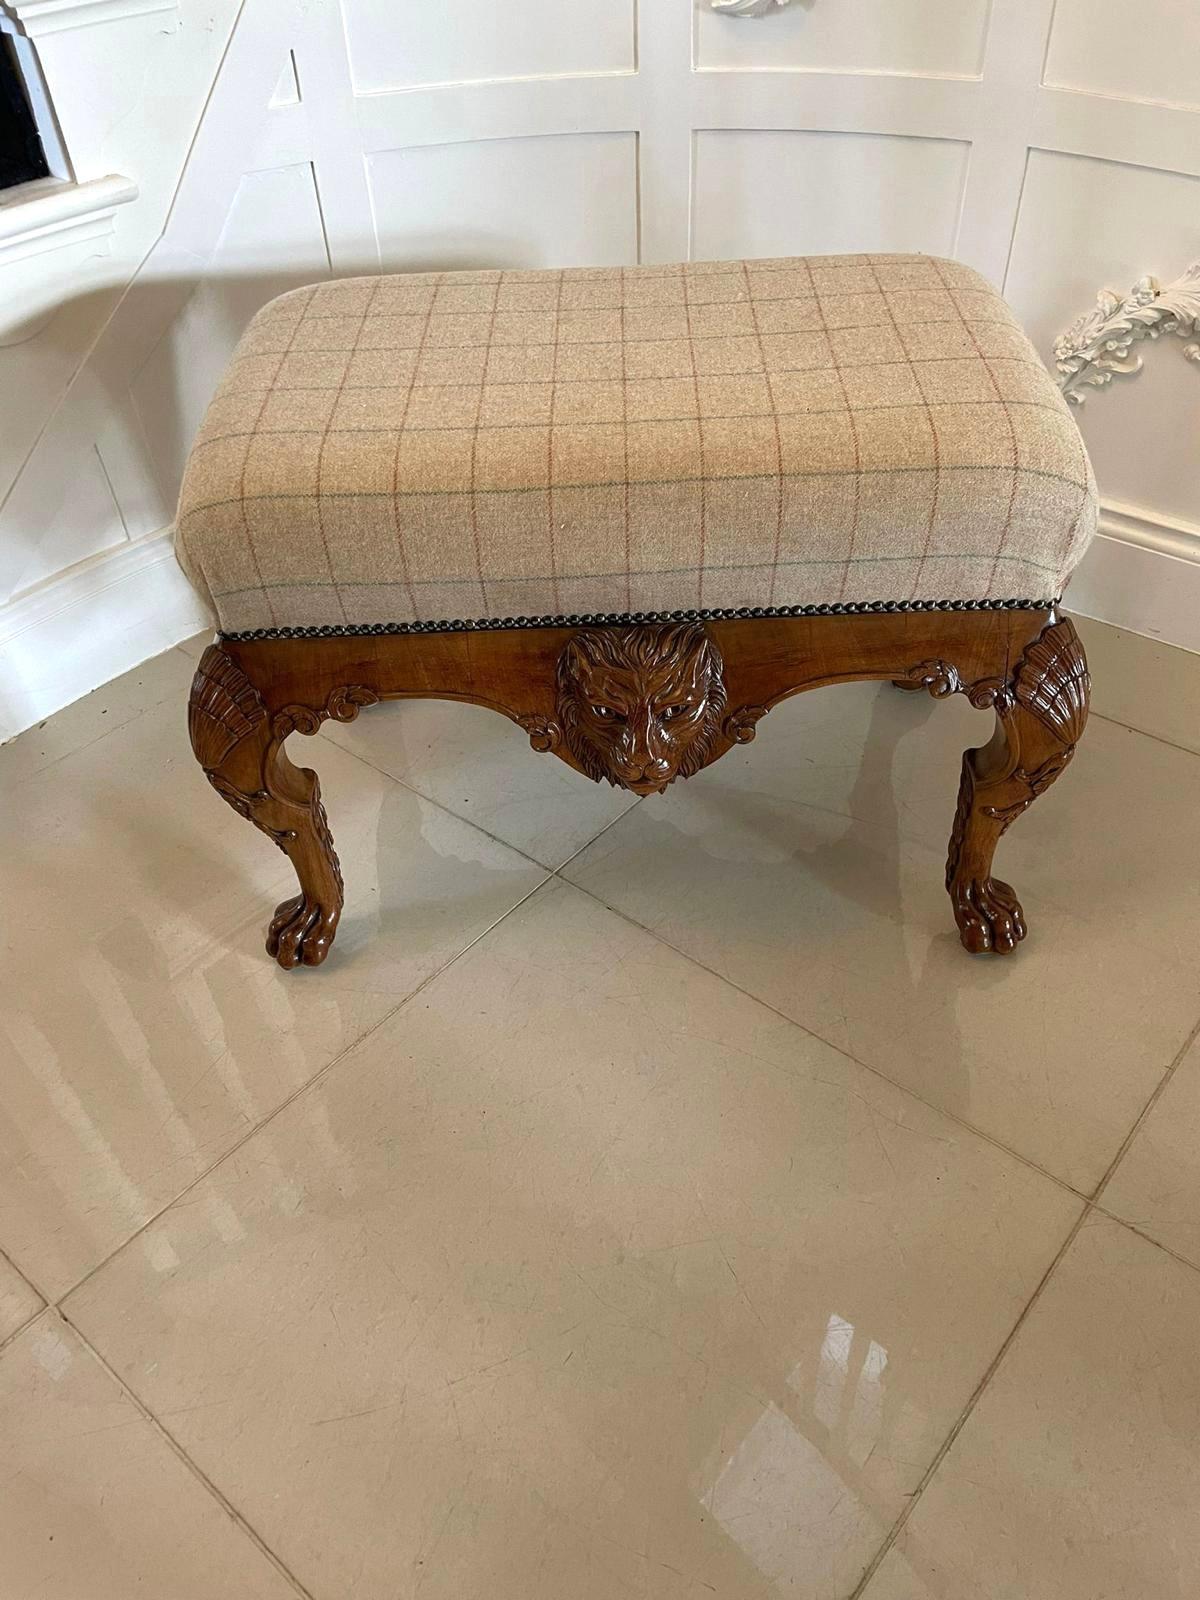 Outstanding quality antique Victorian carved walnut freestanding stool having a newly reupholstered seat in a quality fabric above an outstanding quality carved walnut freestanding 
stool standing on shaped solid walnut cabriole legs with claw feet